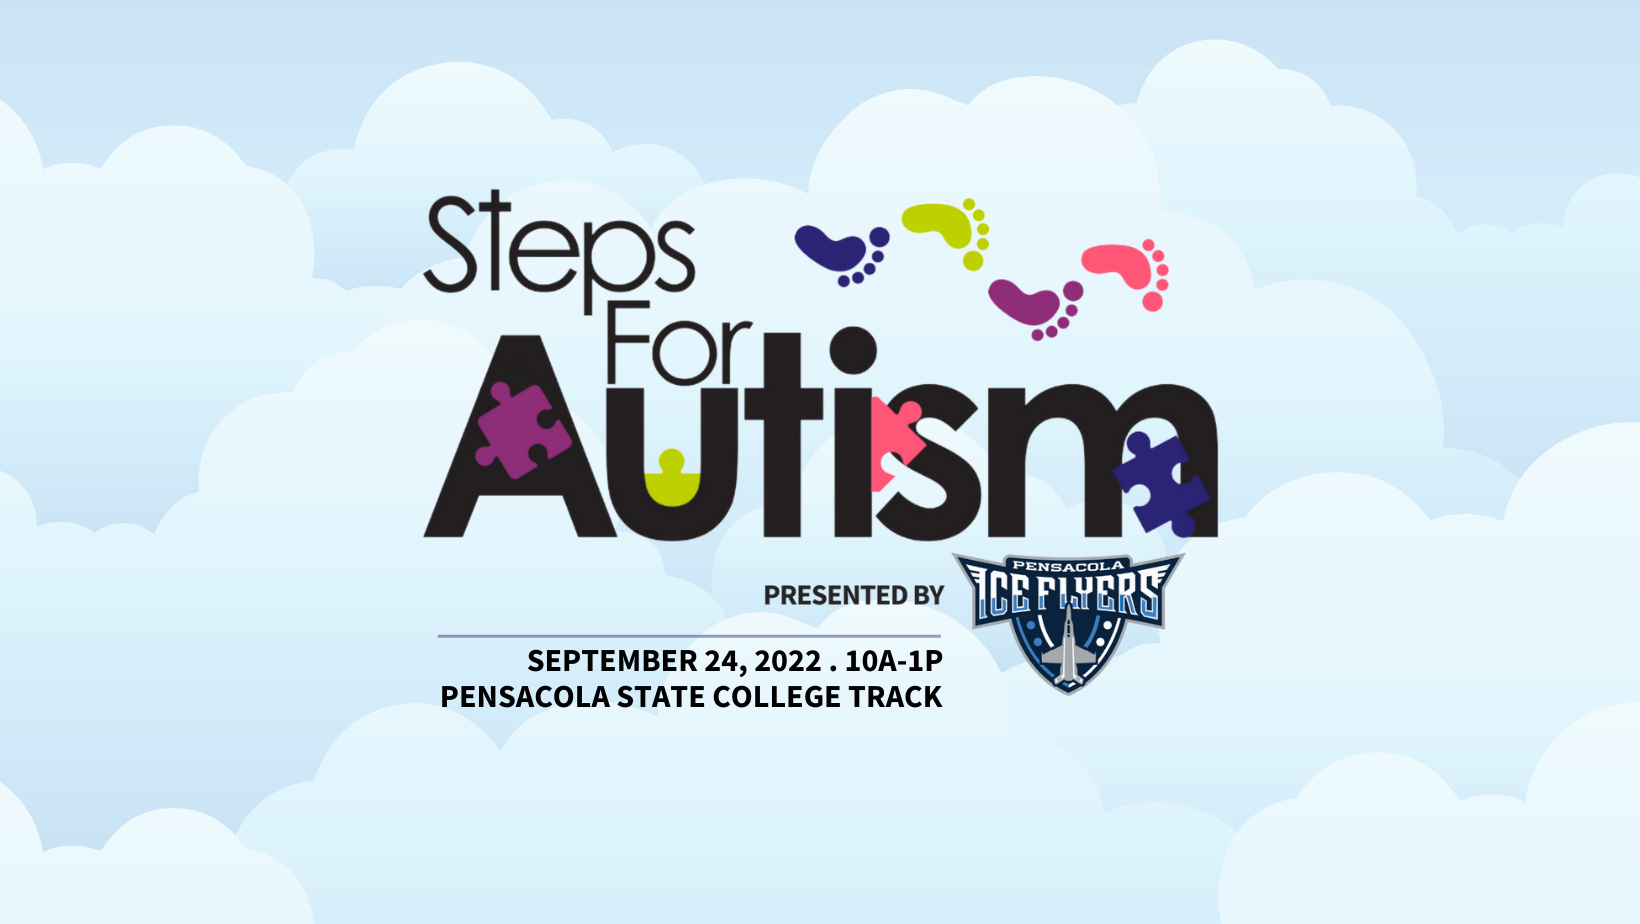 Steps for Autism presented by Pensacola Ice Flyers